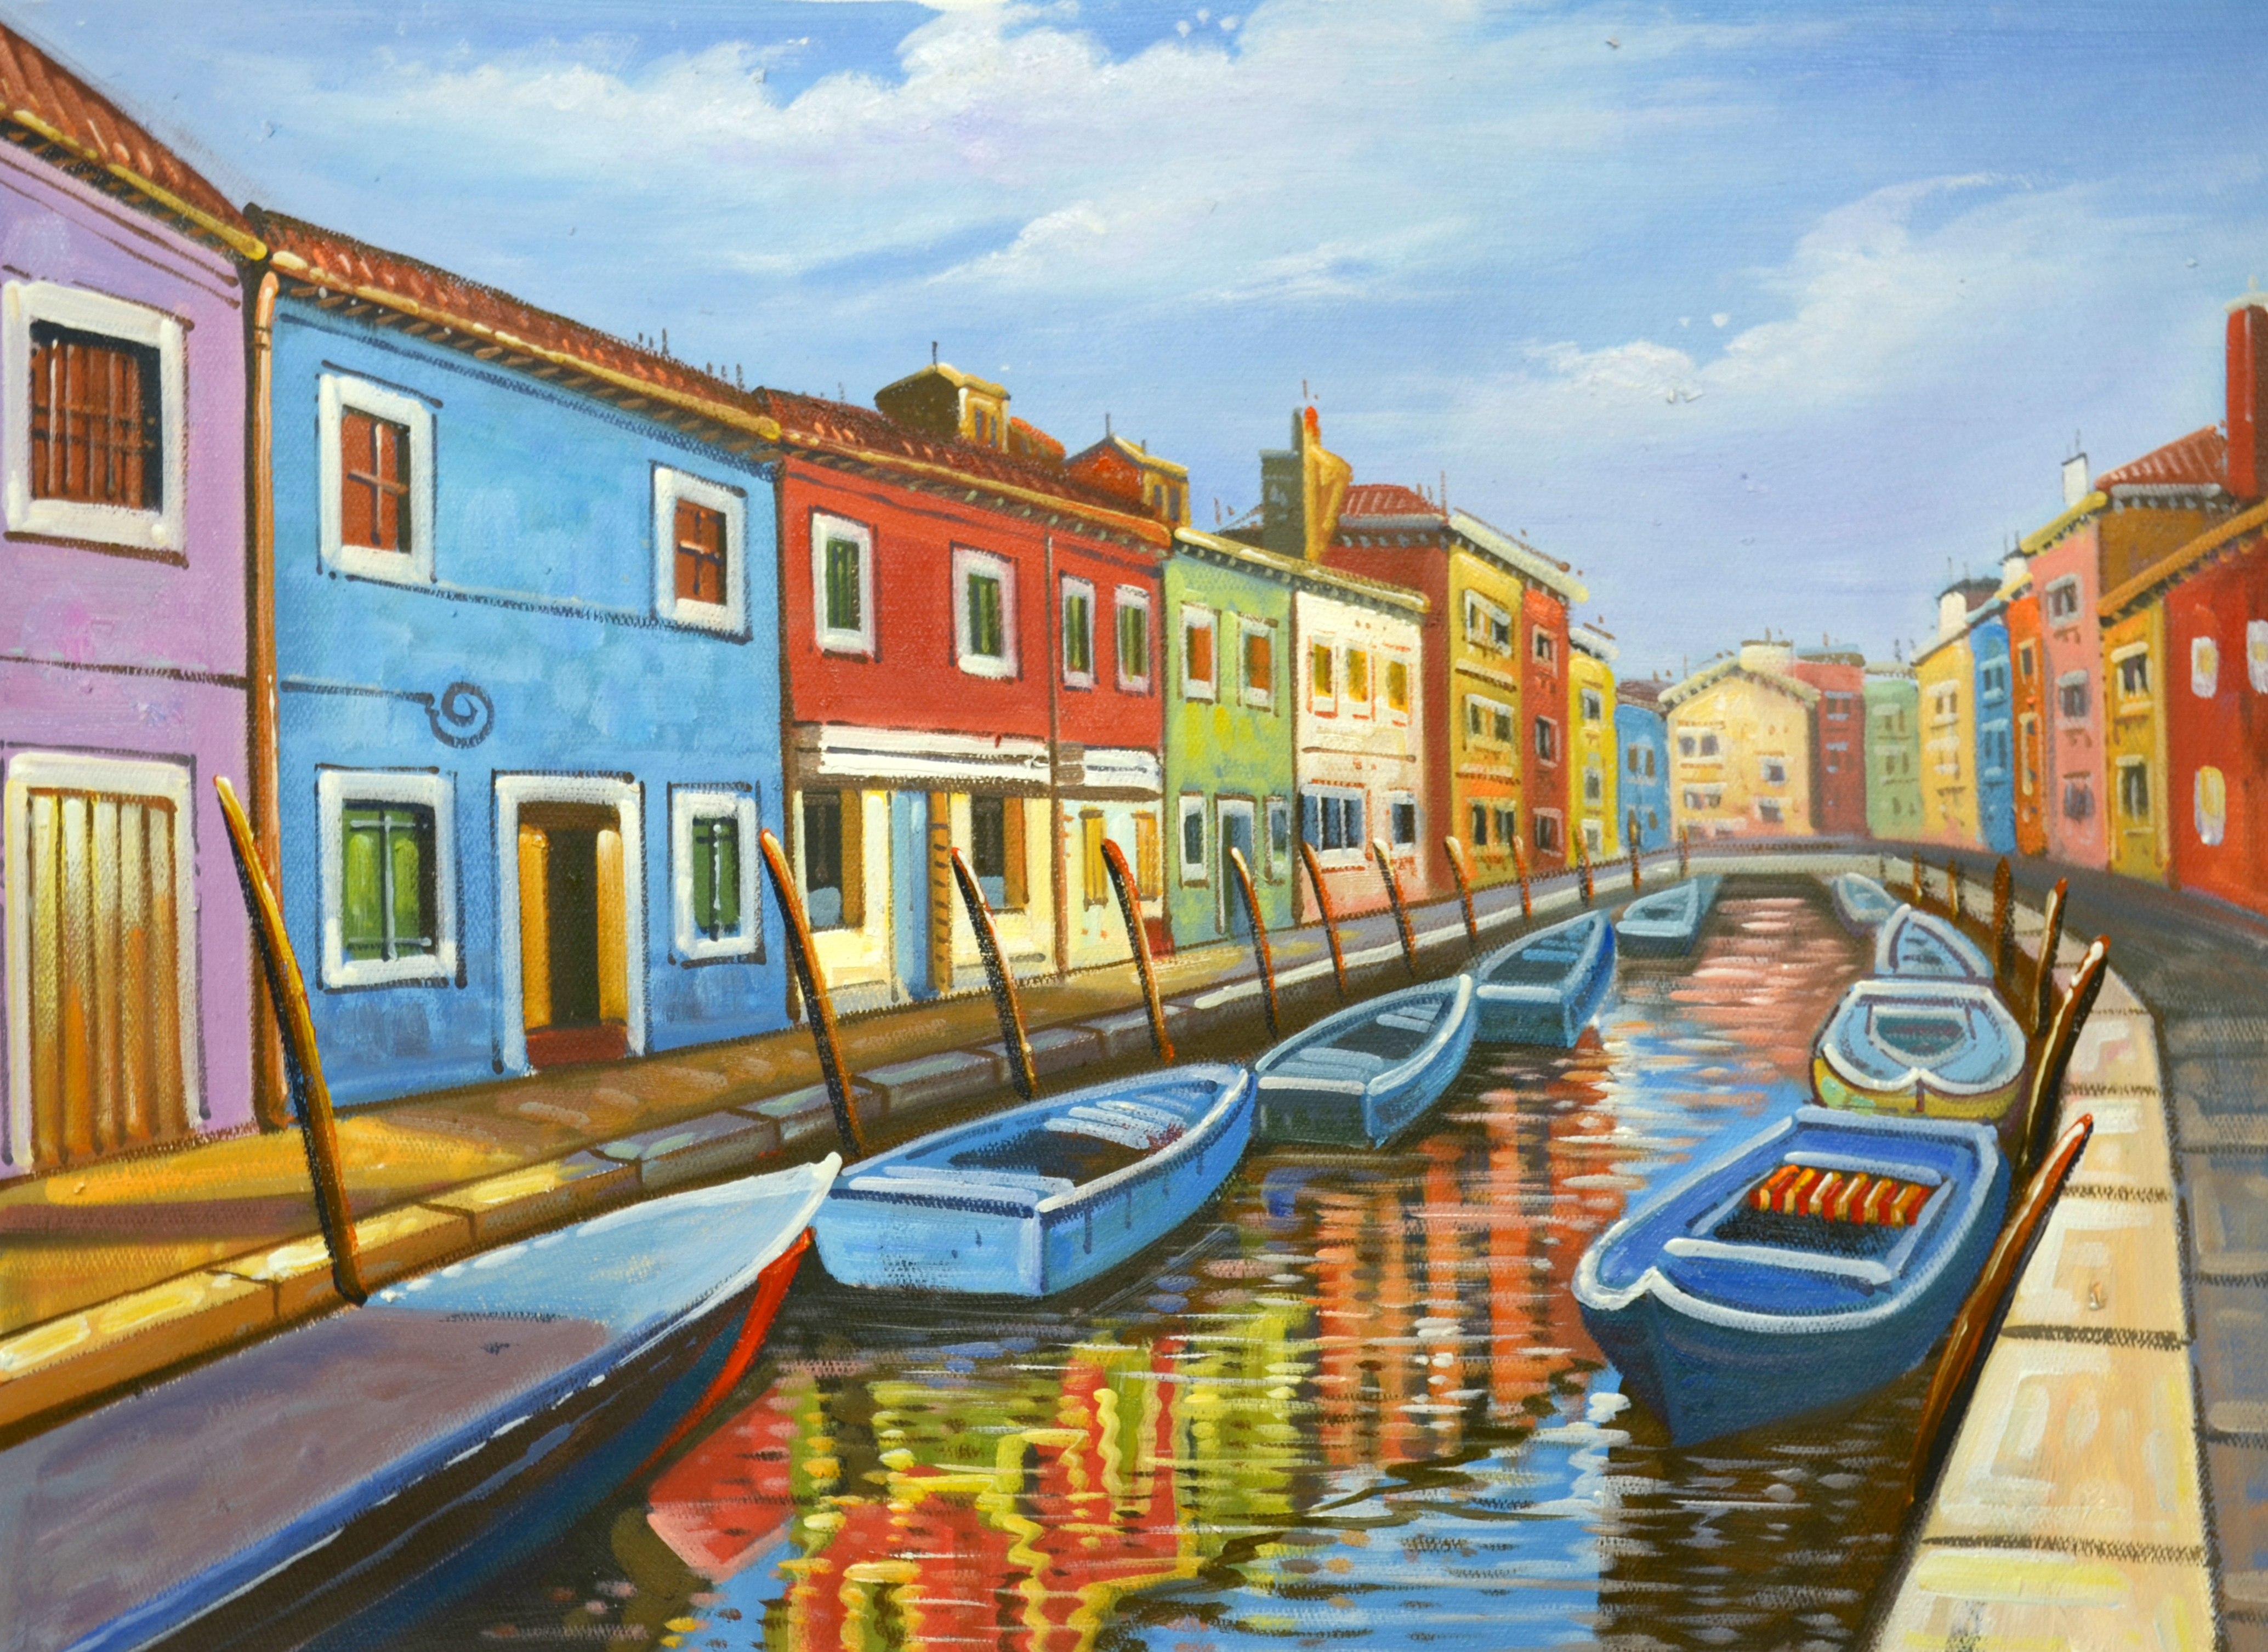 Hand-painting Colorful Venice Houses Side By Oil Painting Large Rest Room - Cool Abstract Paintings